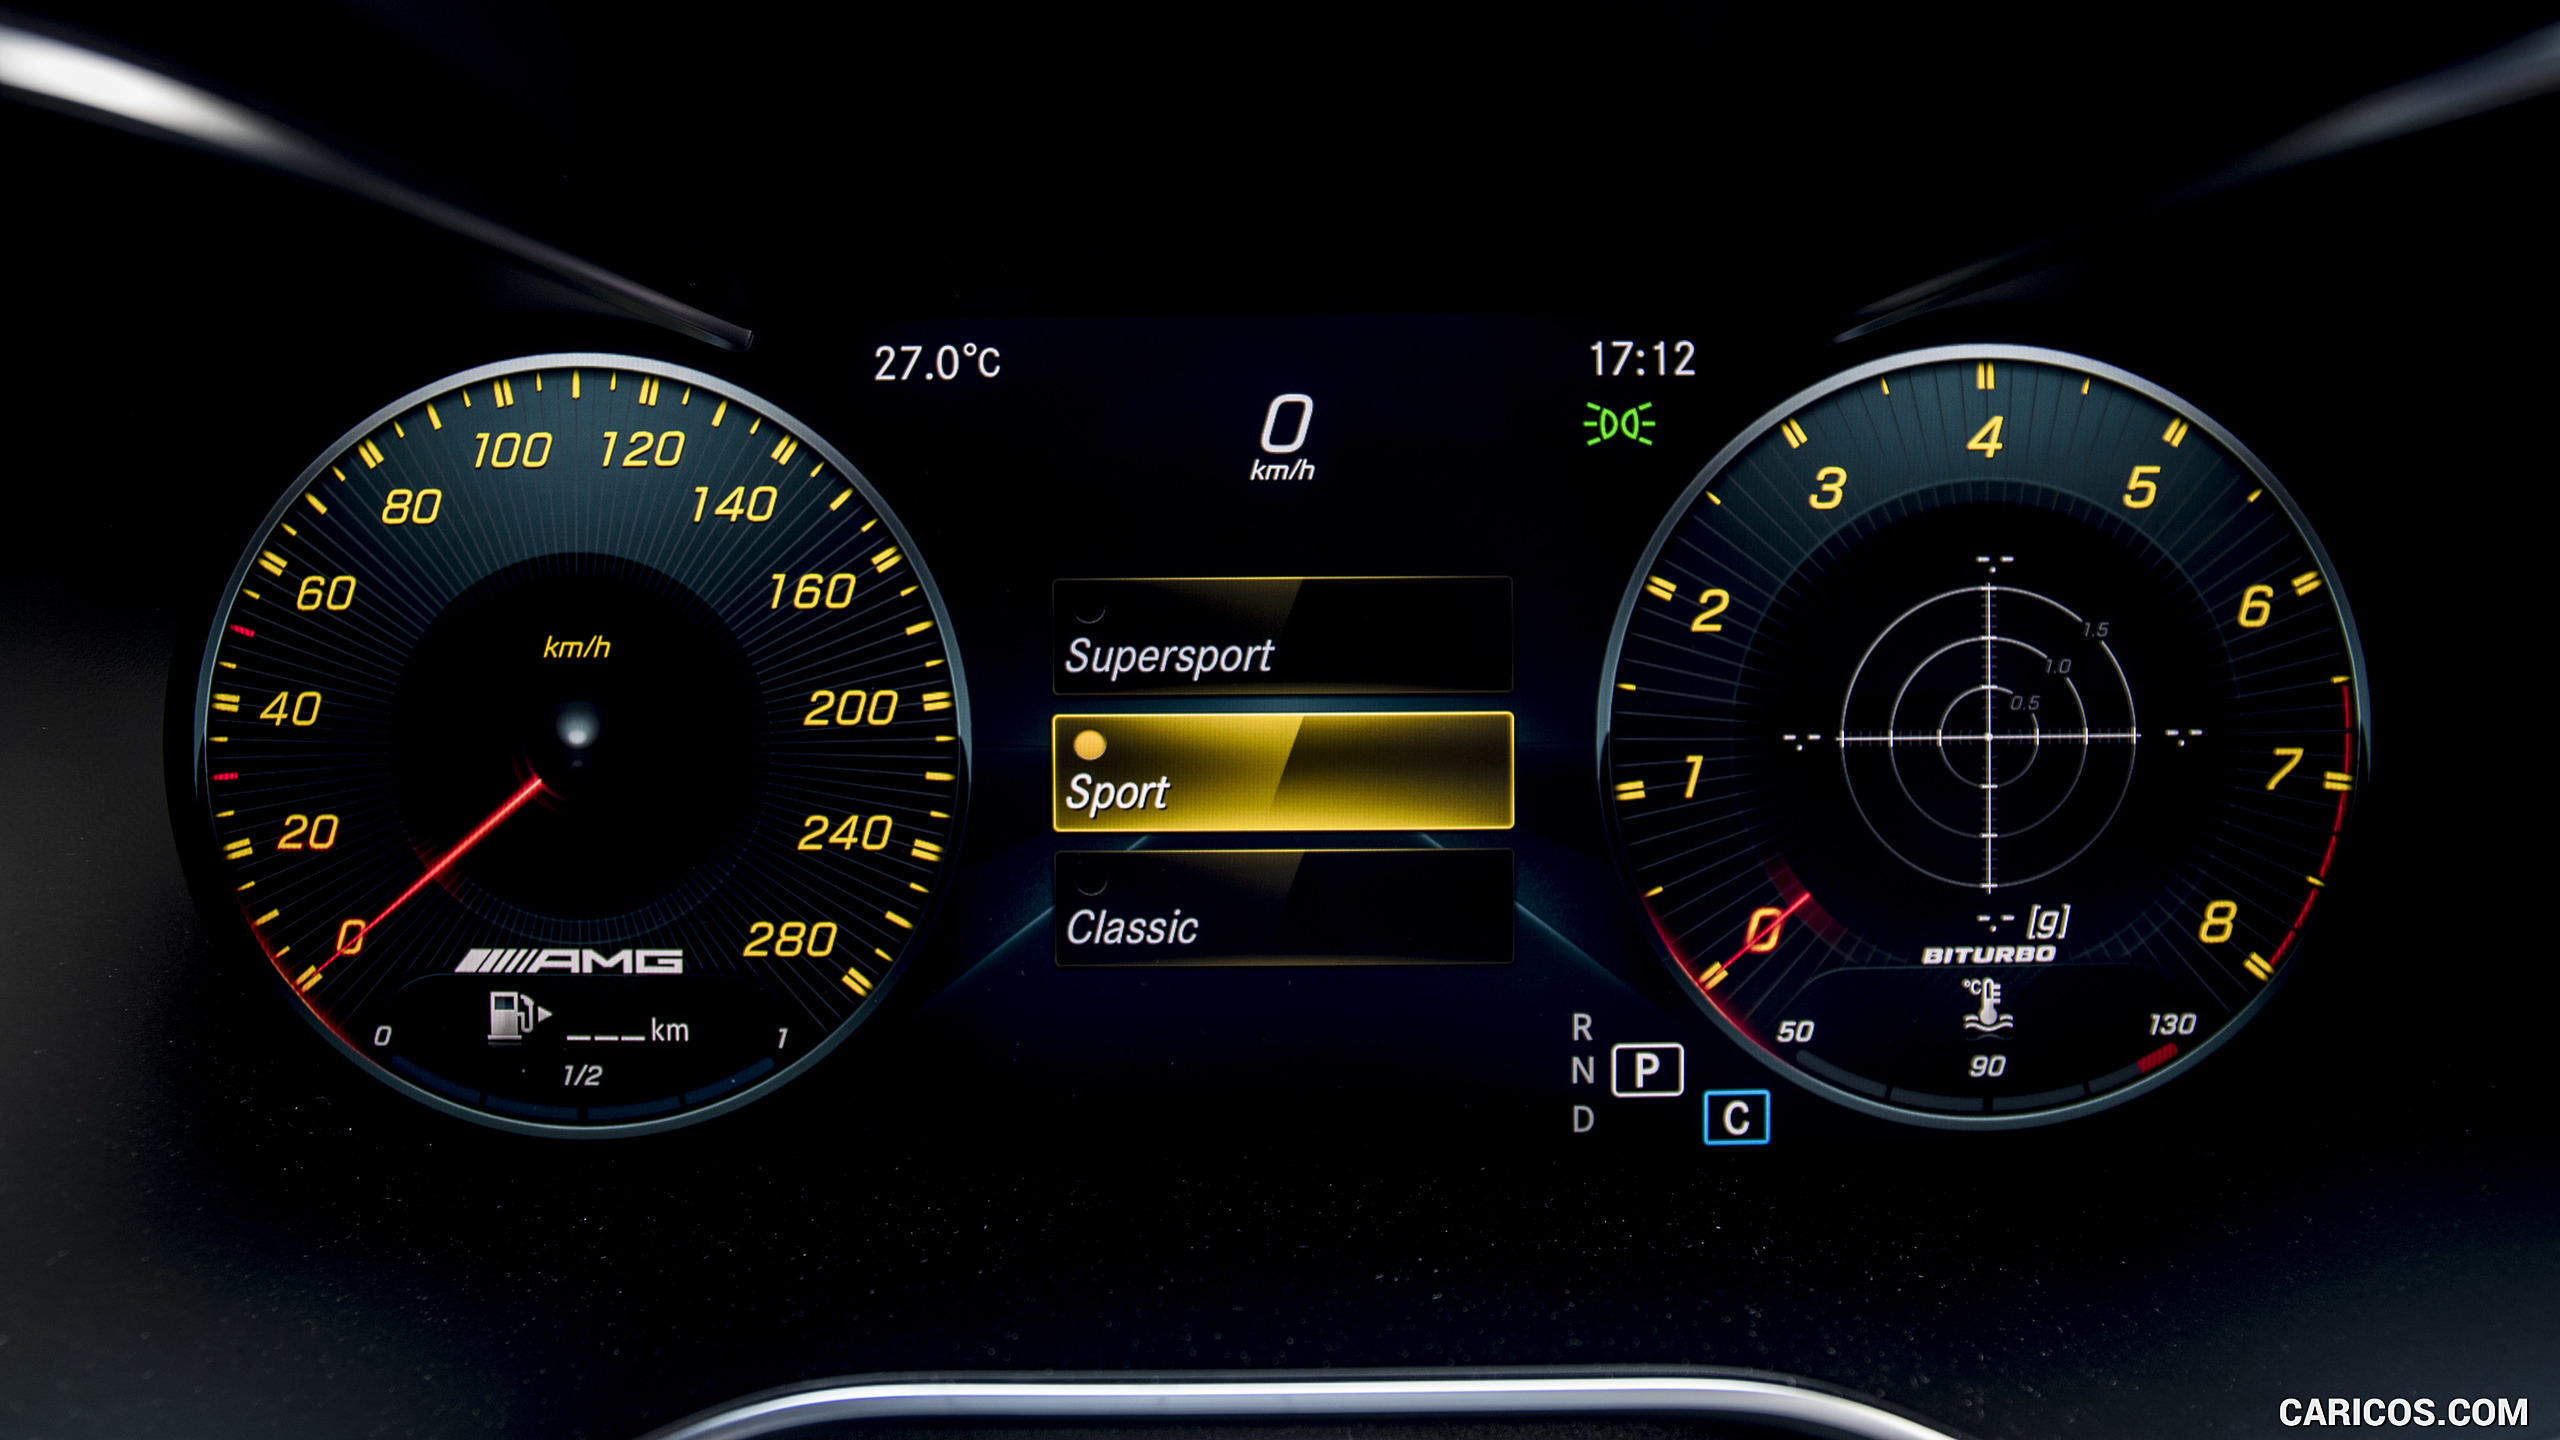 2019 Mercedes-AMG C43 4MATIC Coupe - Digital Instrument Cluster, #100 of 184